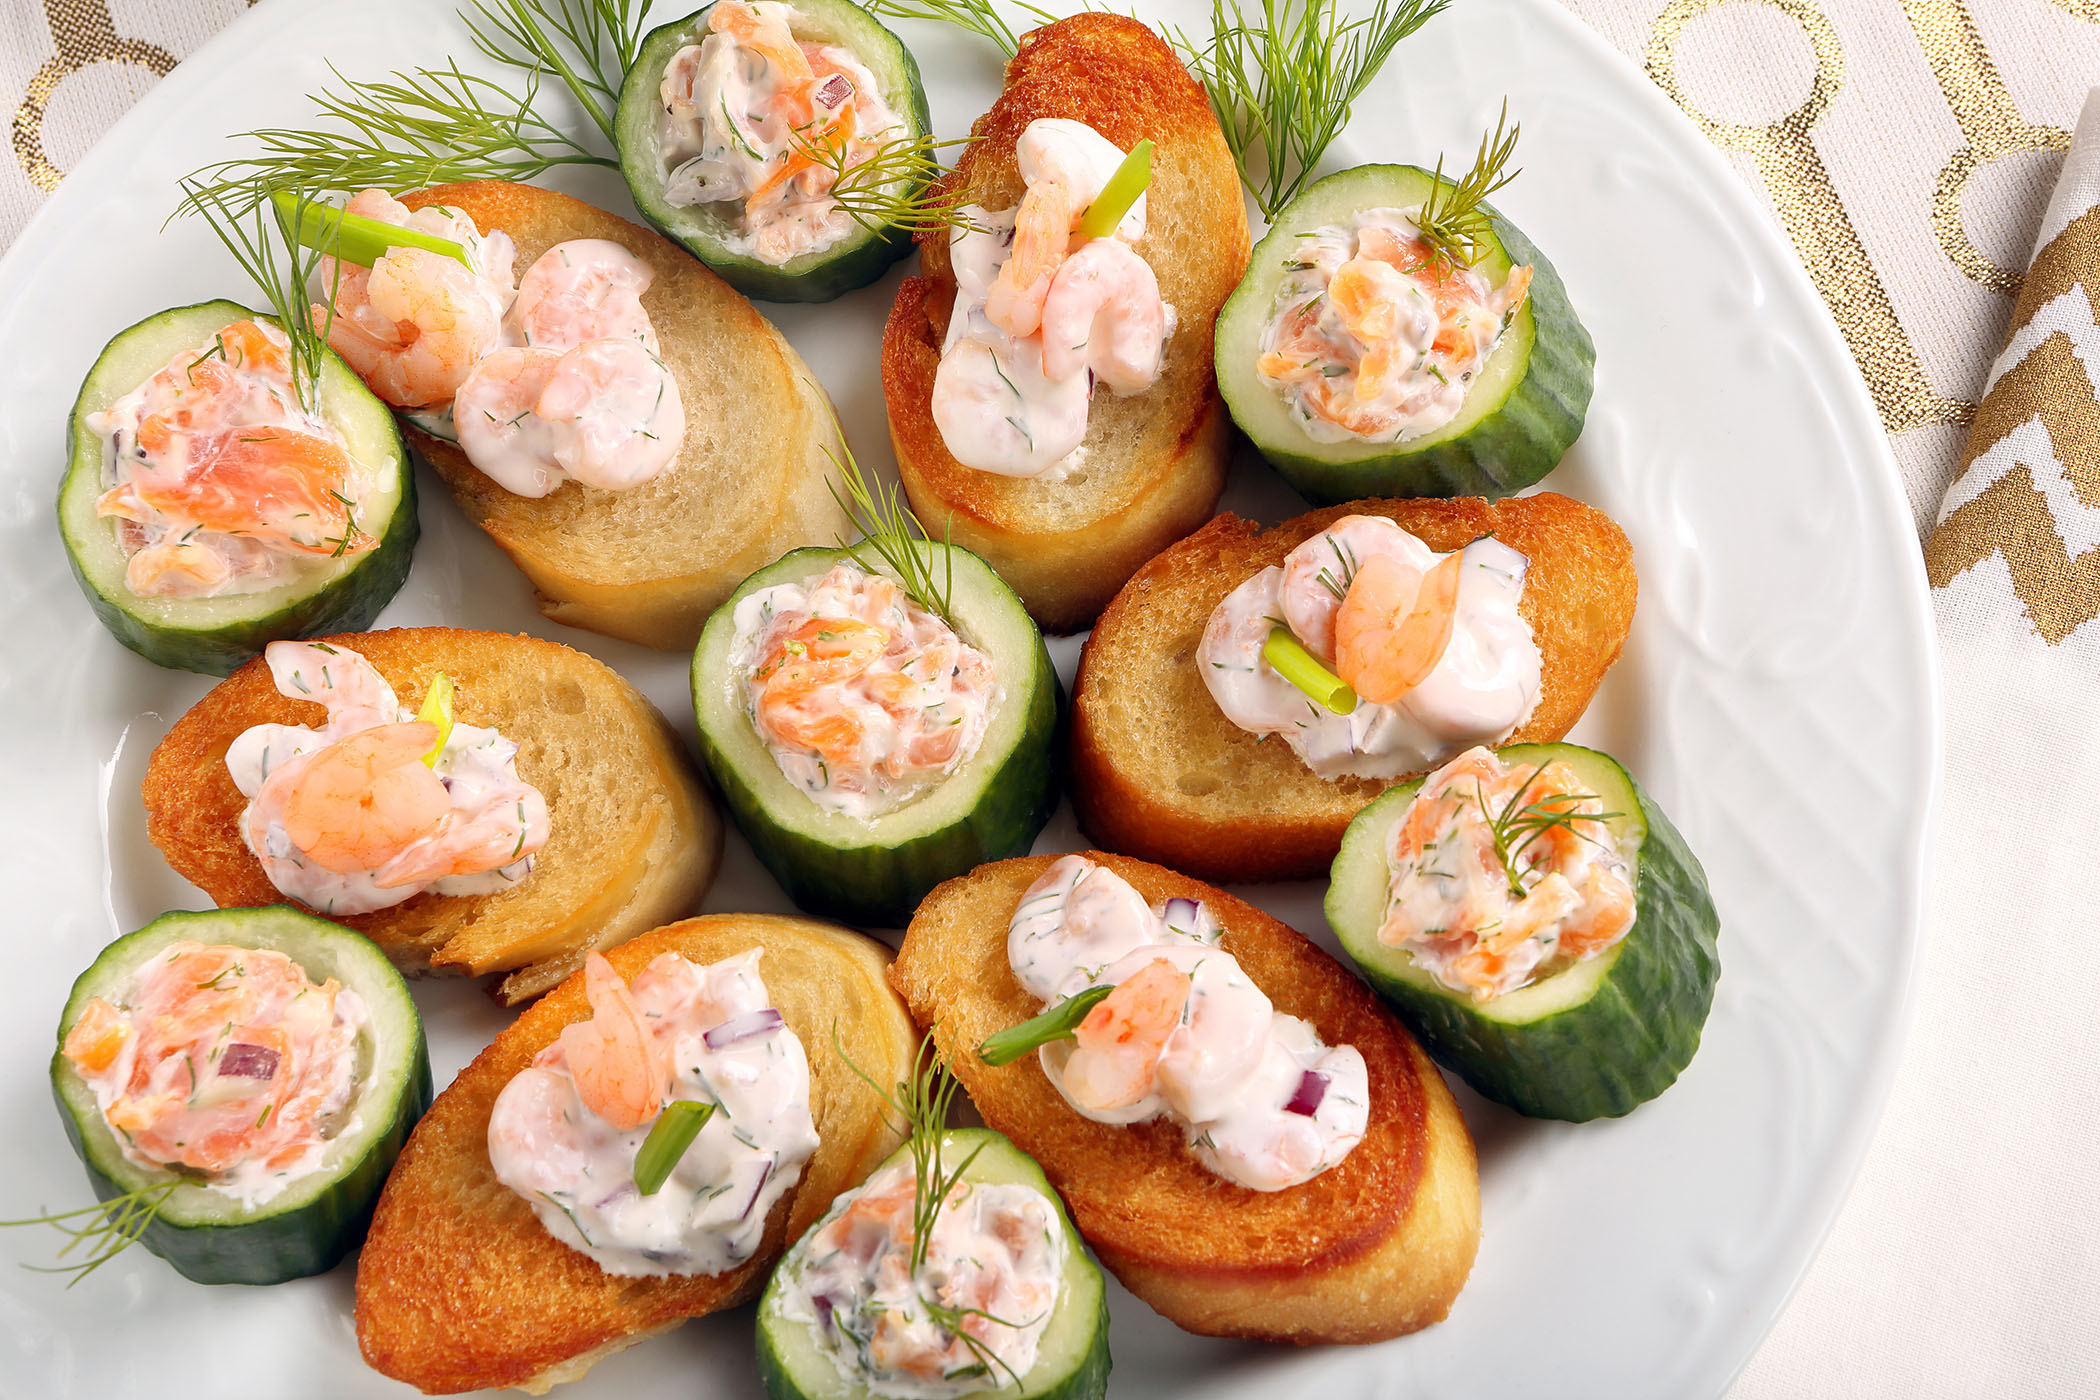 Shrimp And Salmon Creamy Dill Spreads Lakeview Farms